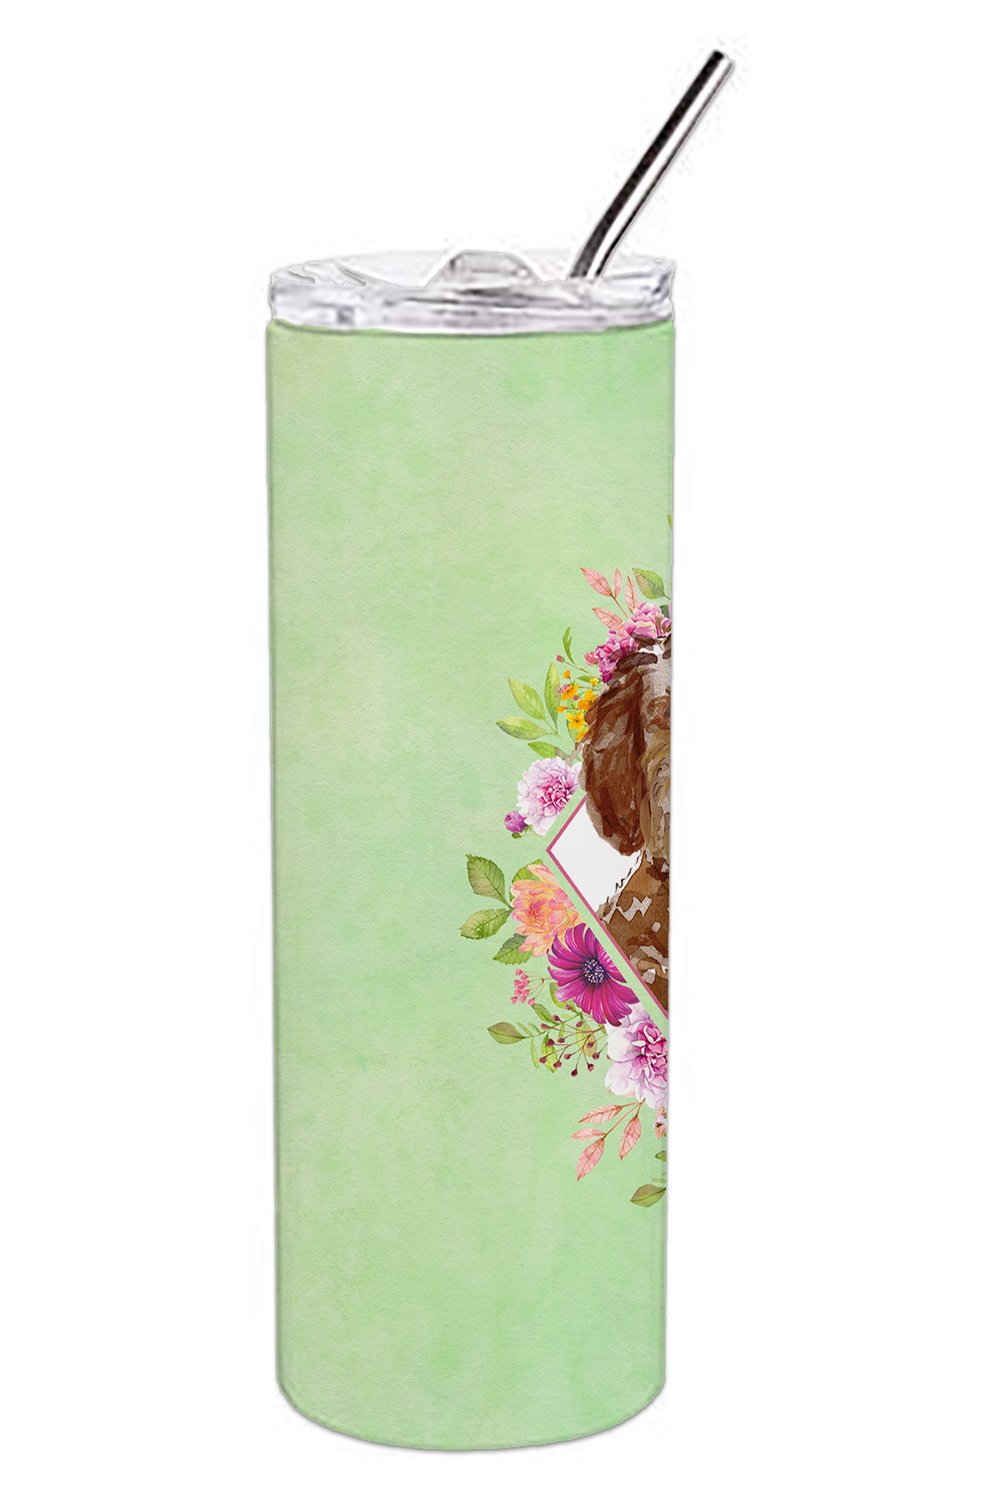 Labradoodle Green Flowers Double Walled Stainless Steel 20 oz Skinny Tumbler CK4388TBL20 by Caroline's Treasures